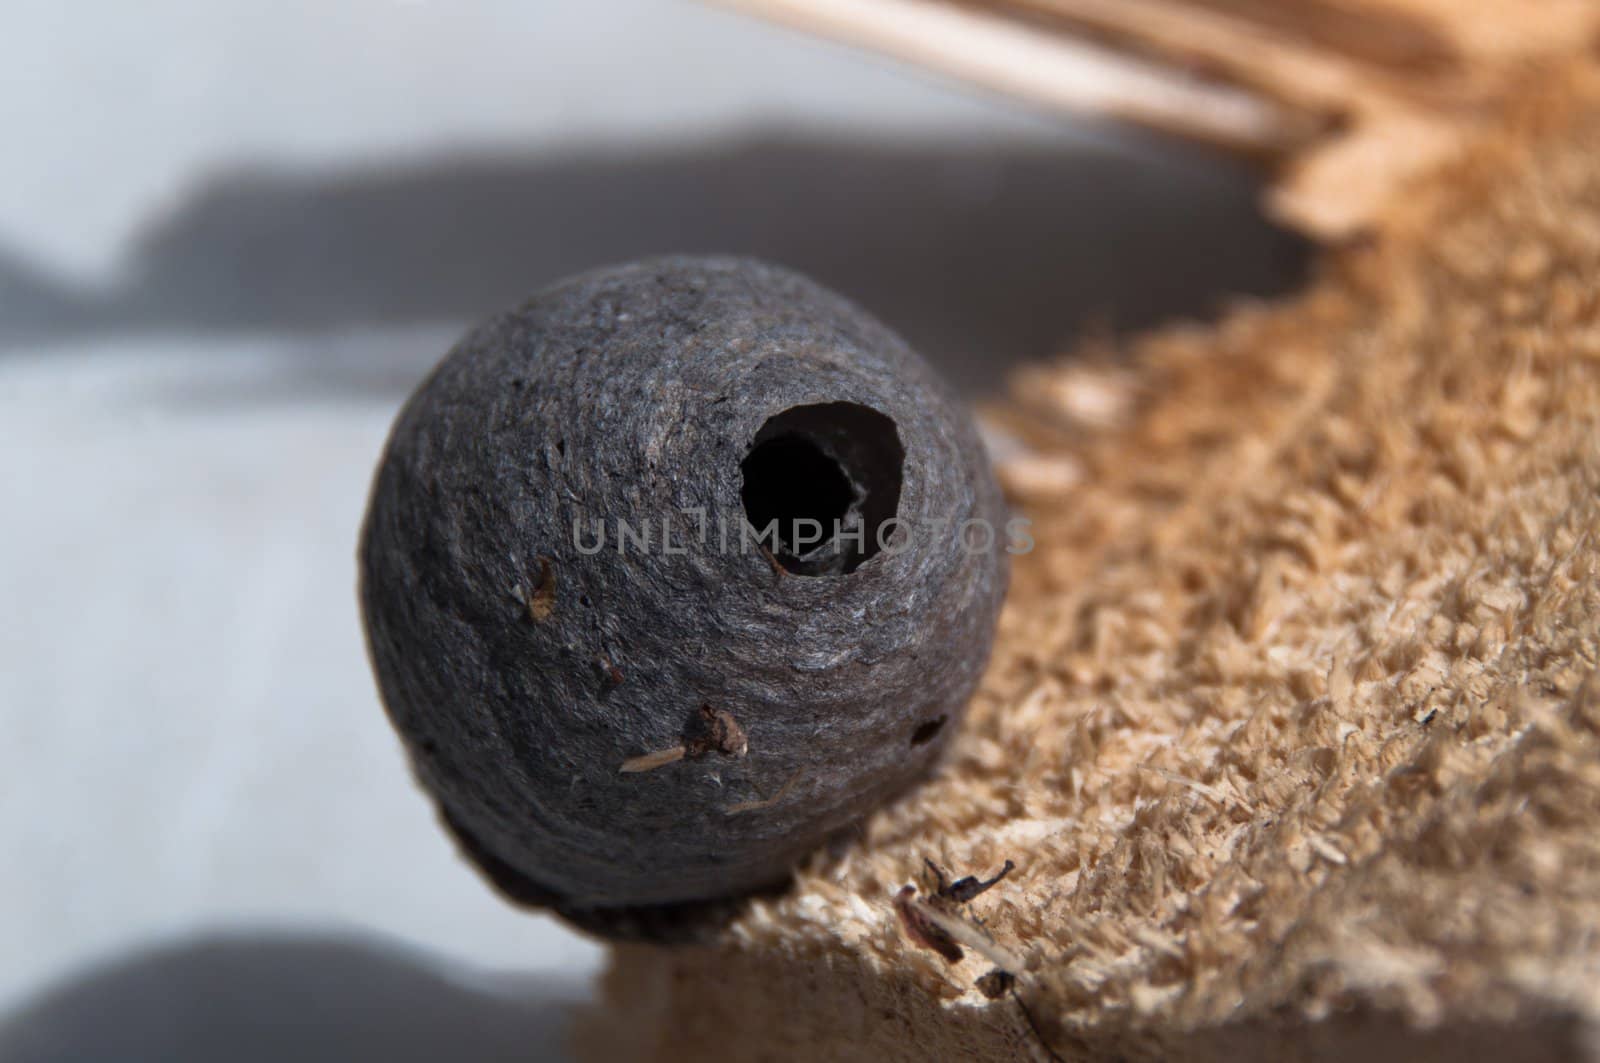 Small wasp nest built on a log of wood